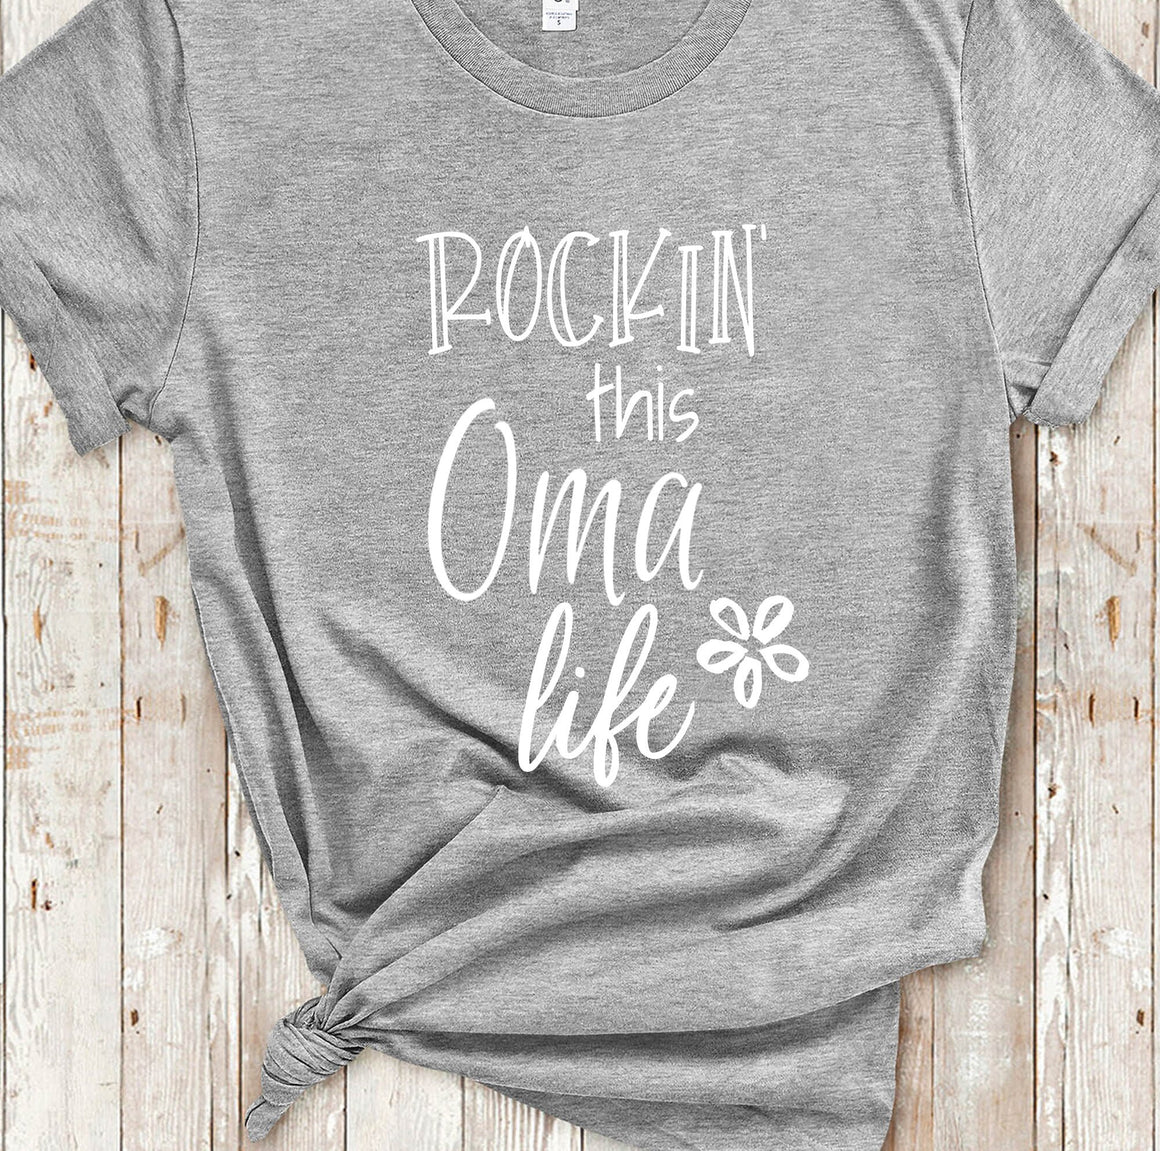 Rockin This Oma Life Tshirt Gift for Grandmother - Funny Oma Shirt Grandmother Birthday Mother's Day Gifts for Oma